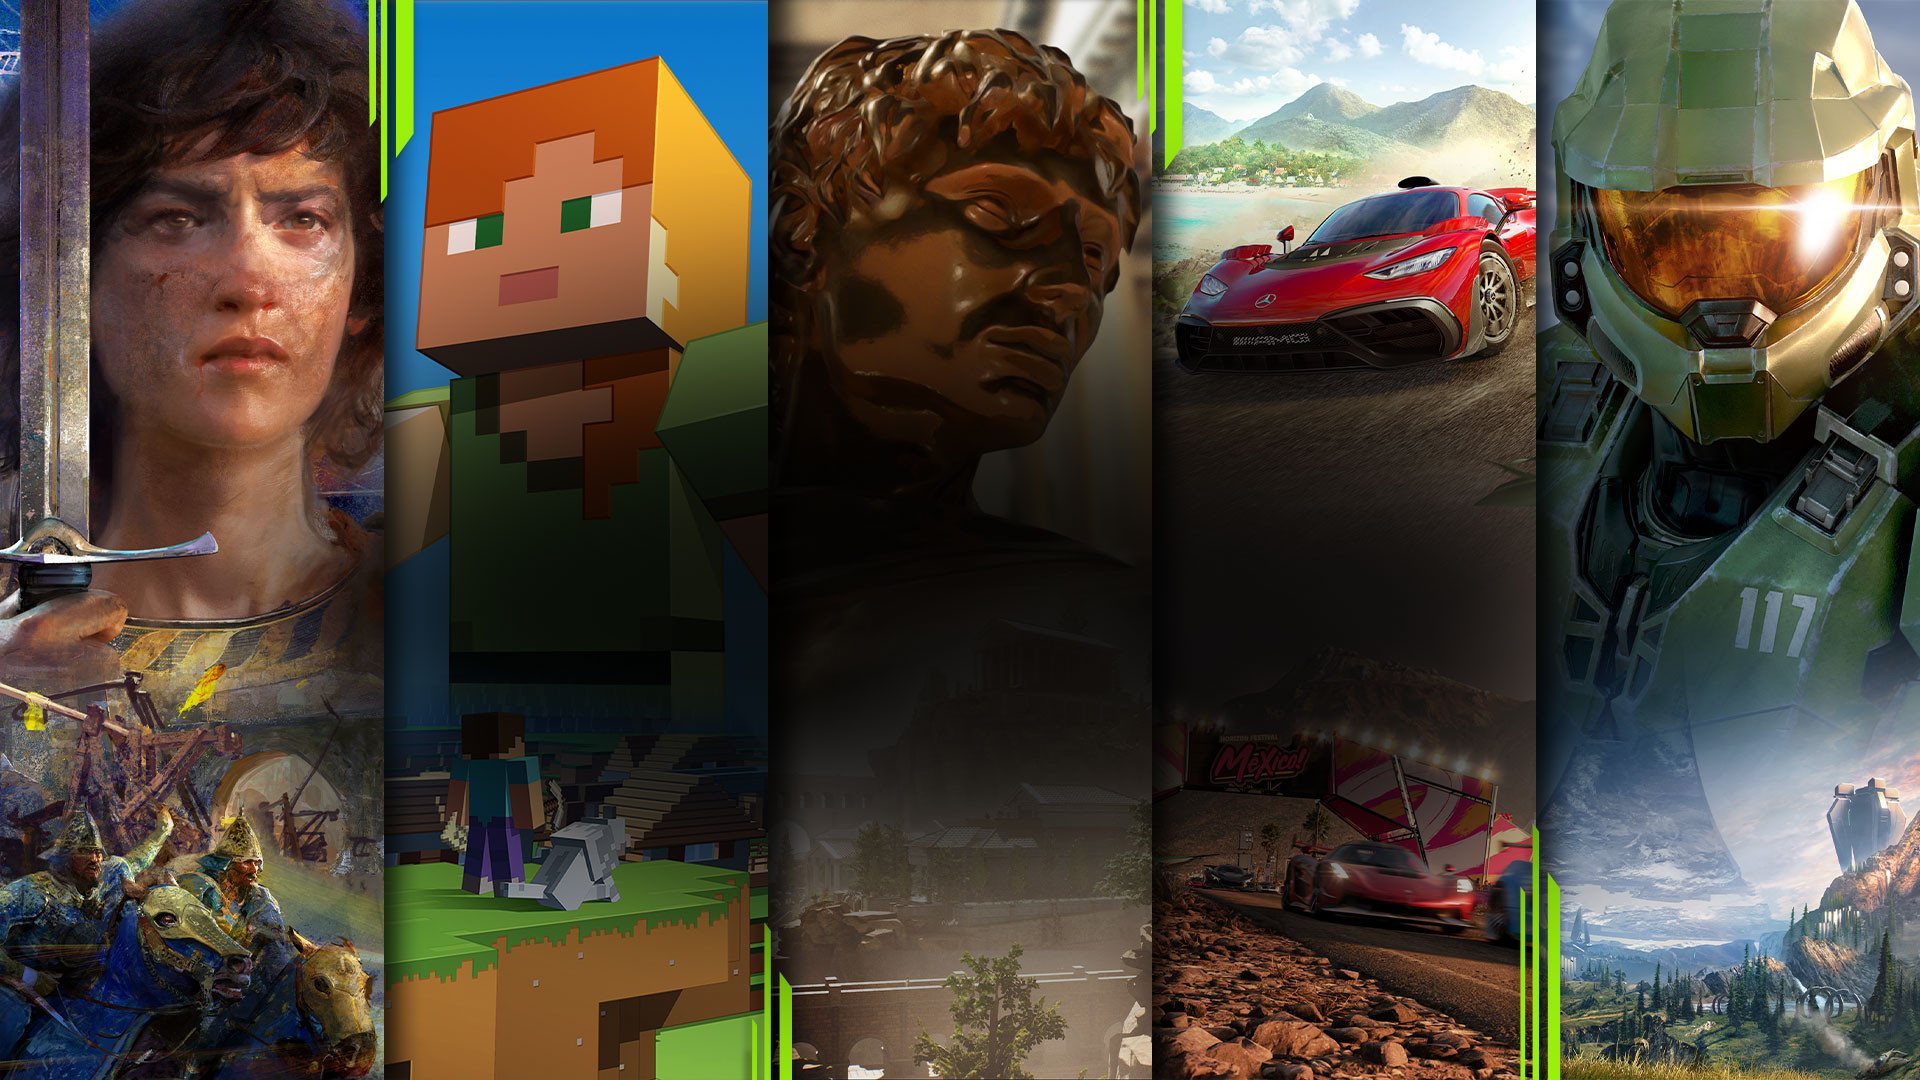 A selection of games available with PC Game Pass including Age of Empires IV, Minecraft, The Forgotten City, Forza Horizon 5, and Halo Infinite.